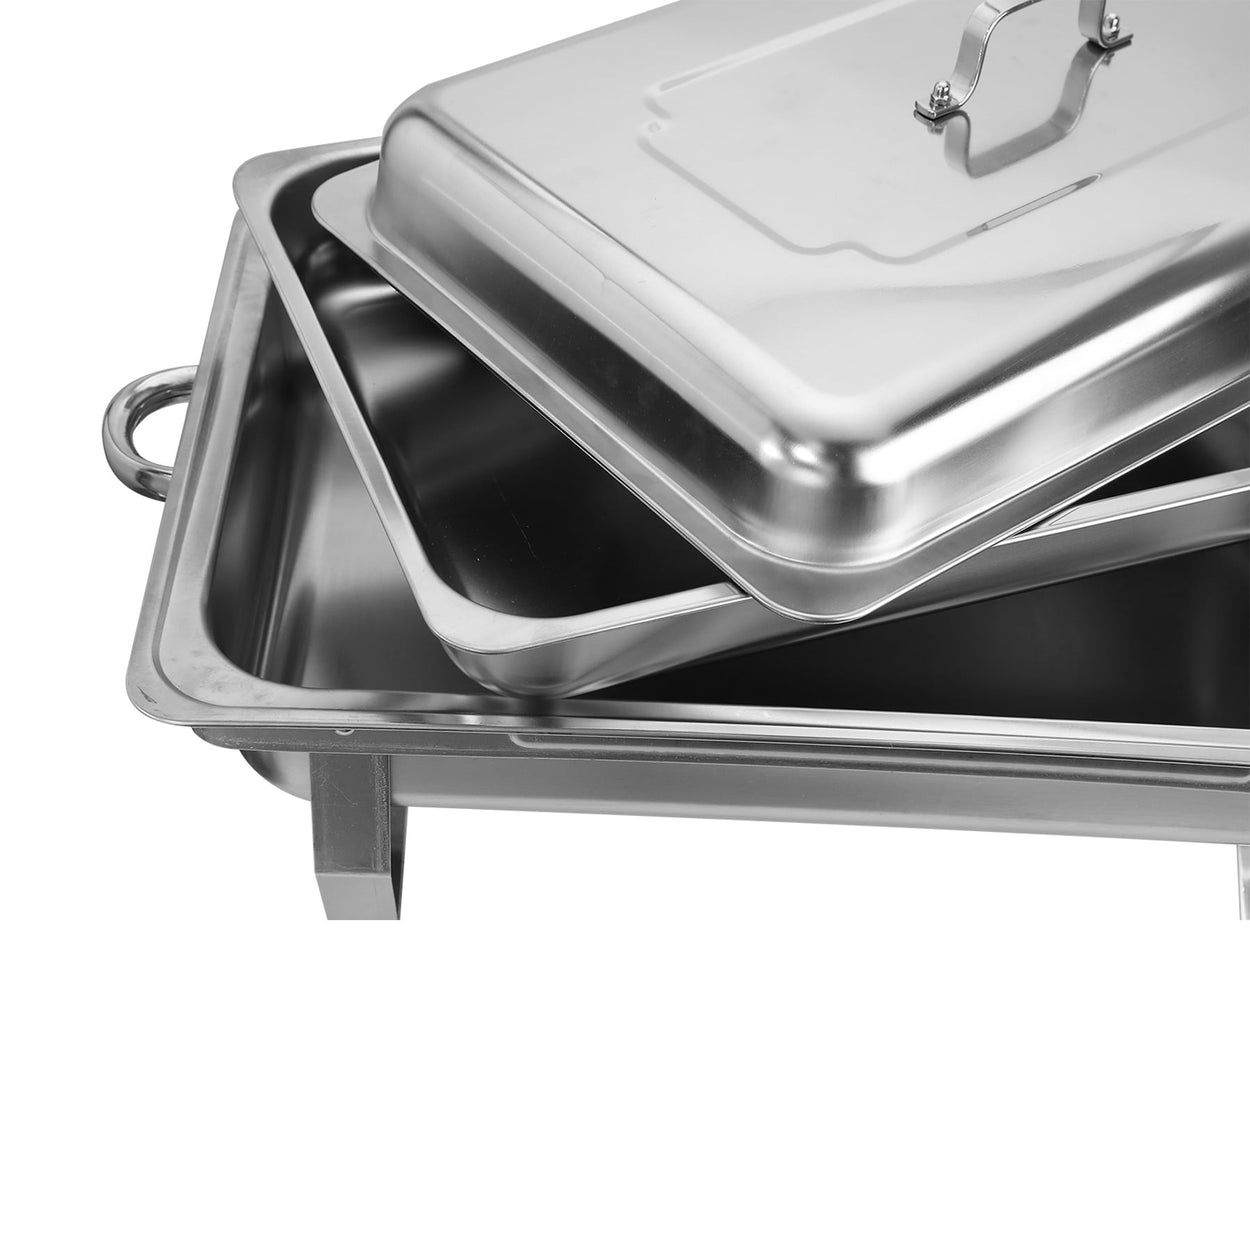 2Pack-Chafer-Chafing-Dish-Sets